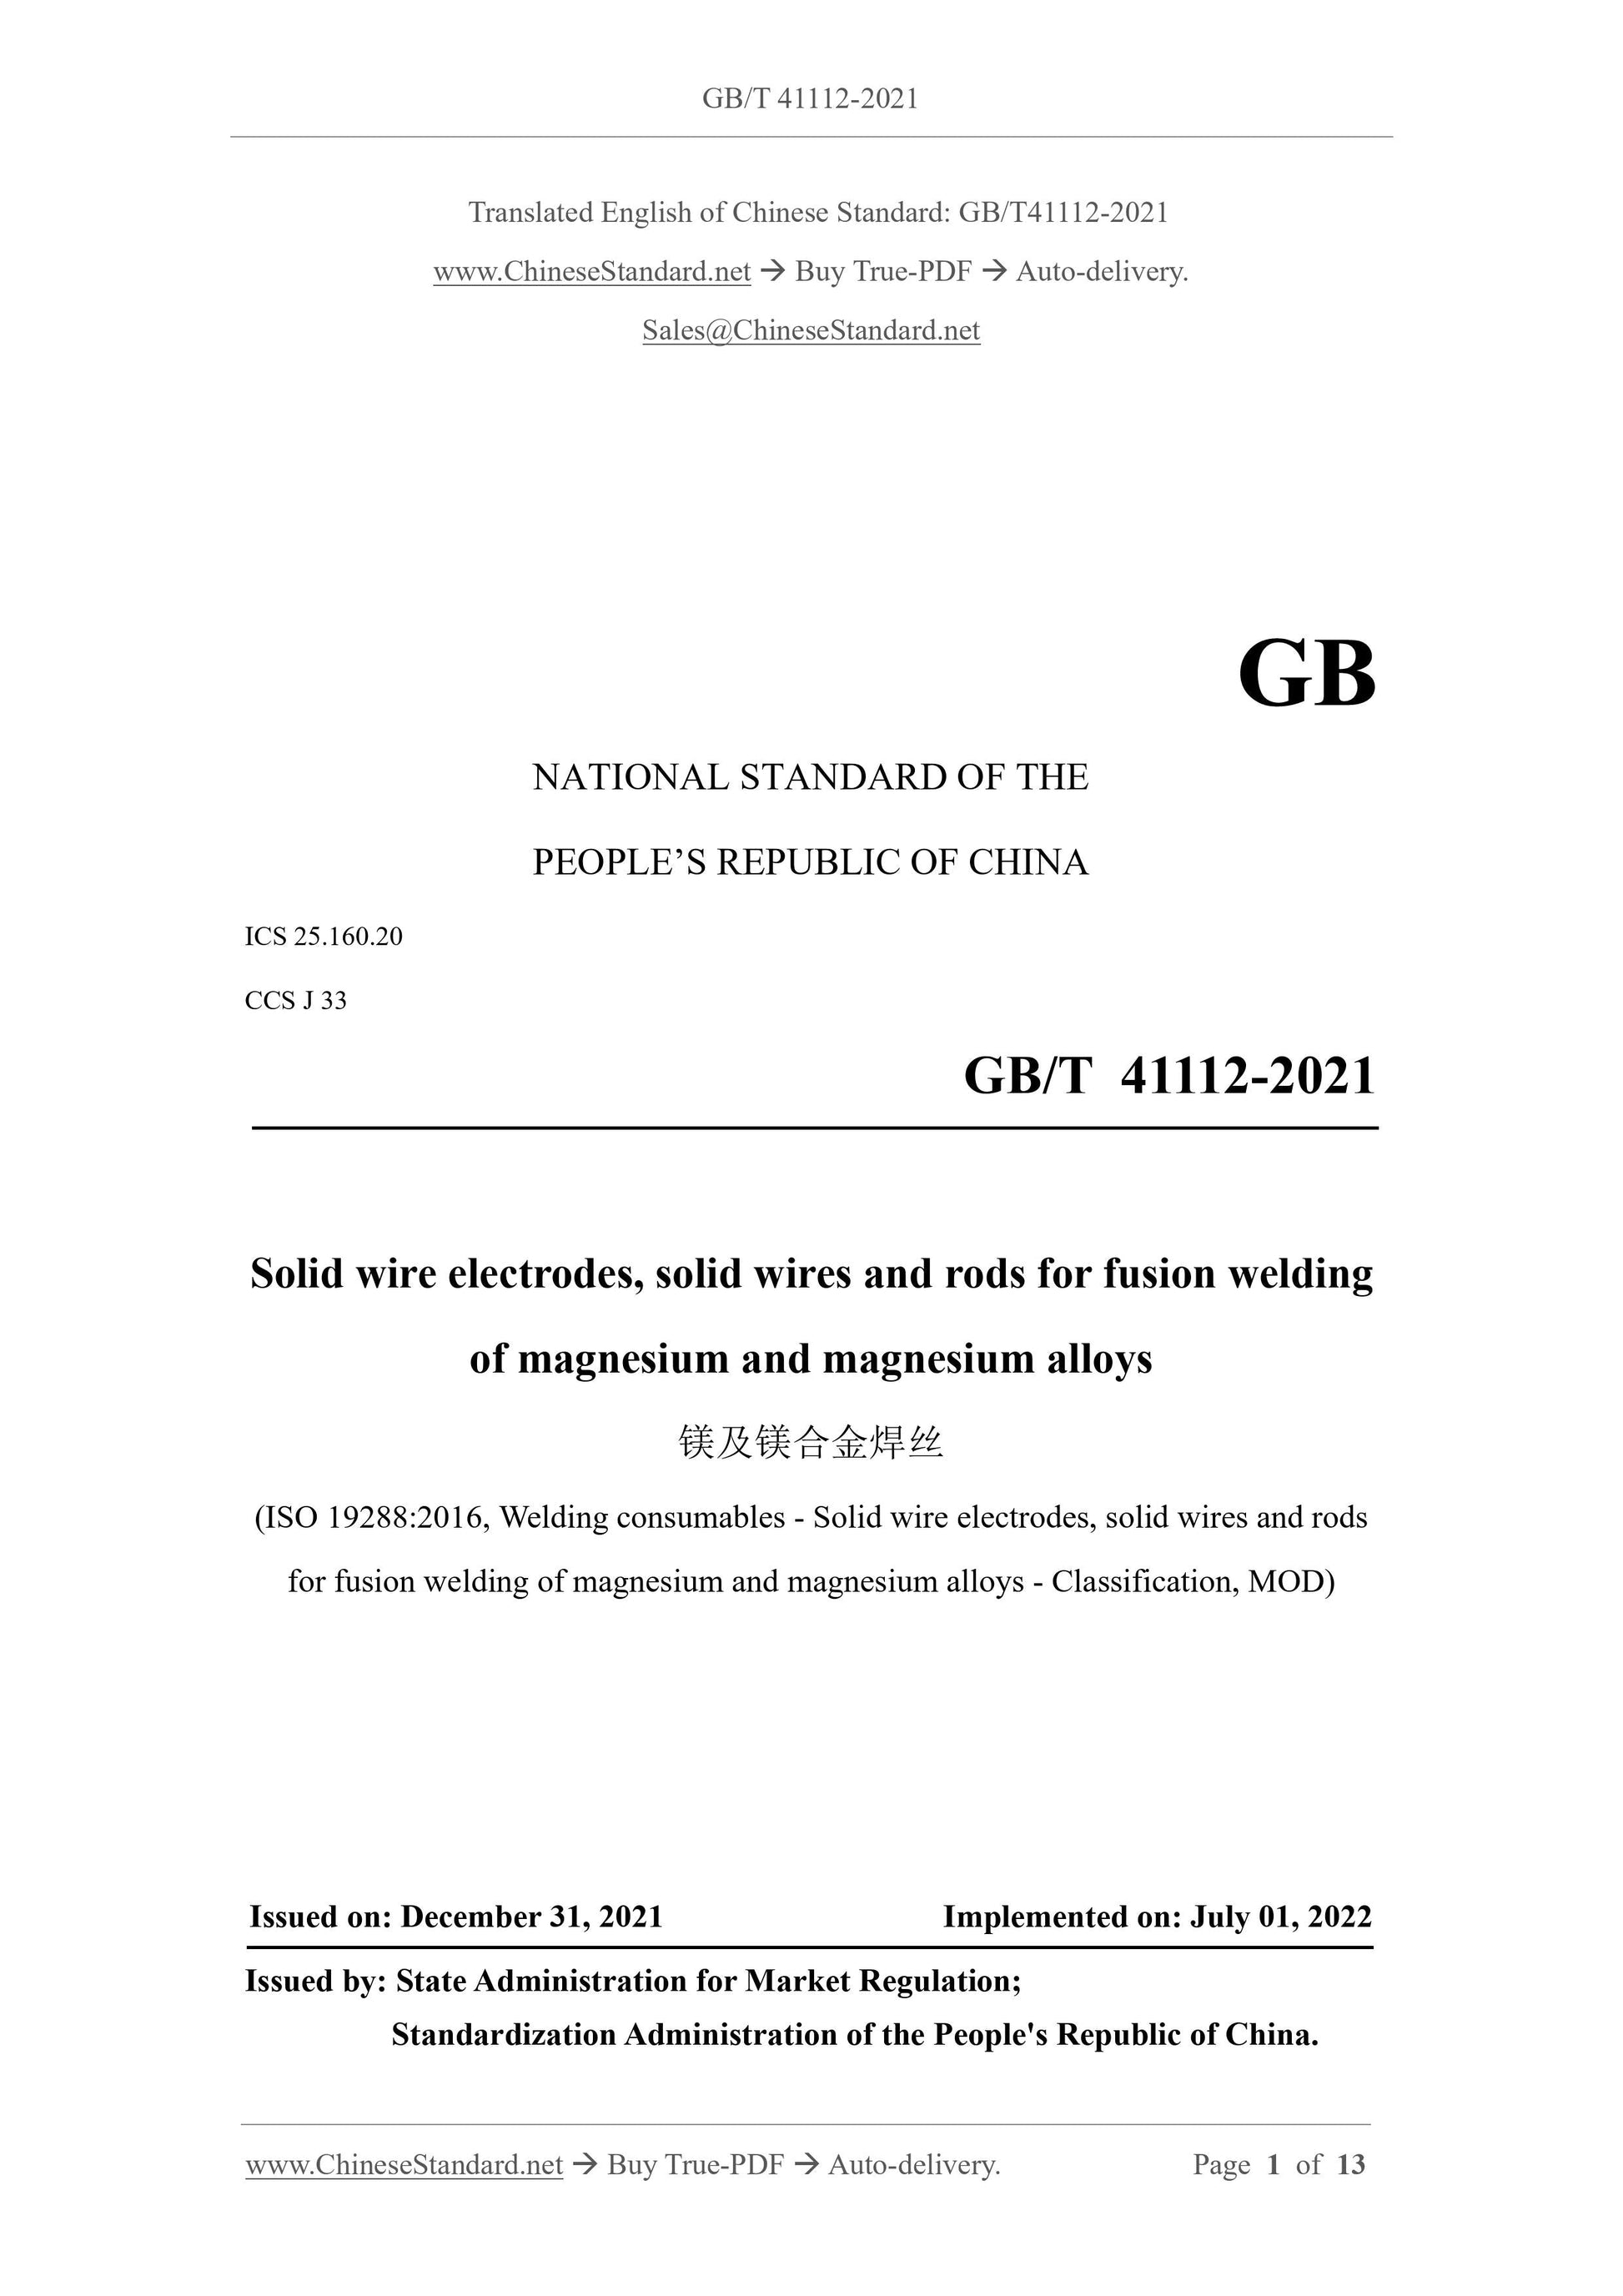 GB/T 41112-2021 Page 1